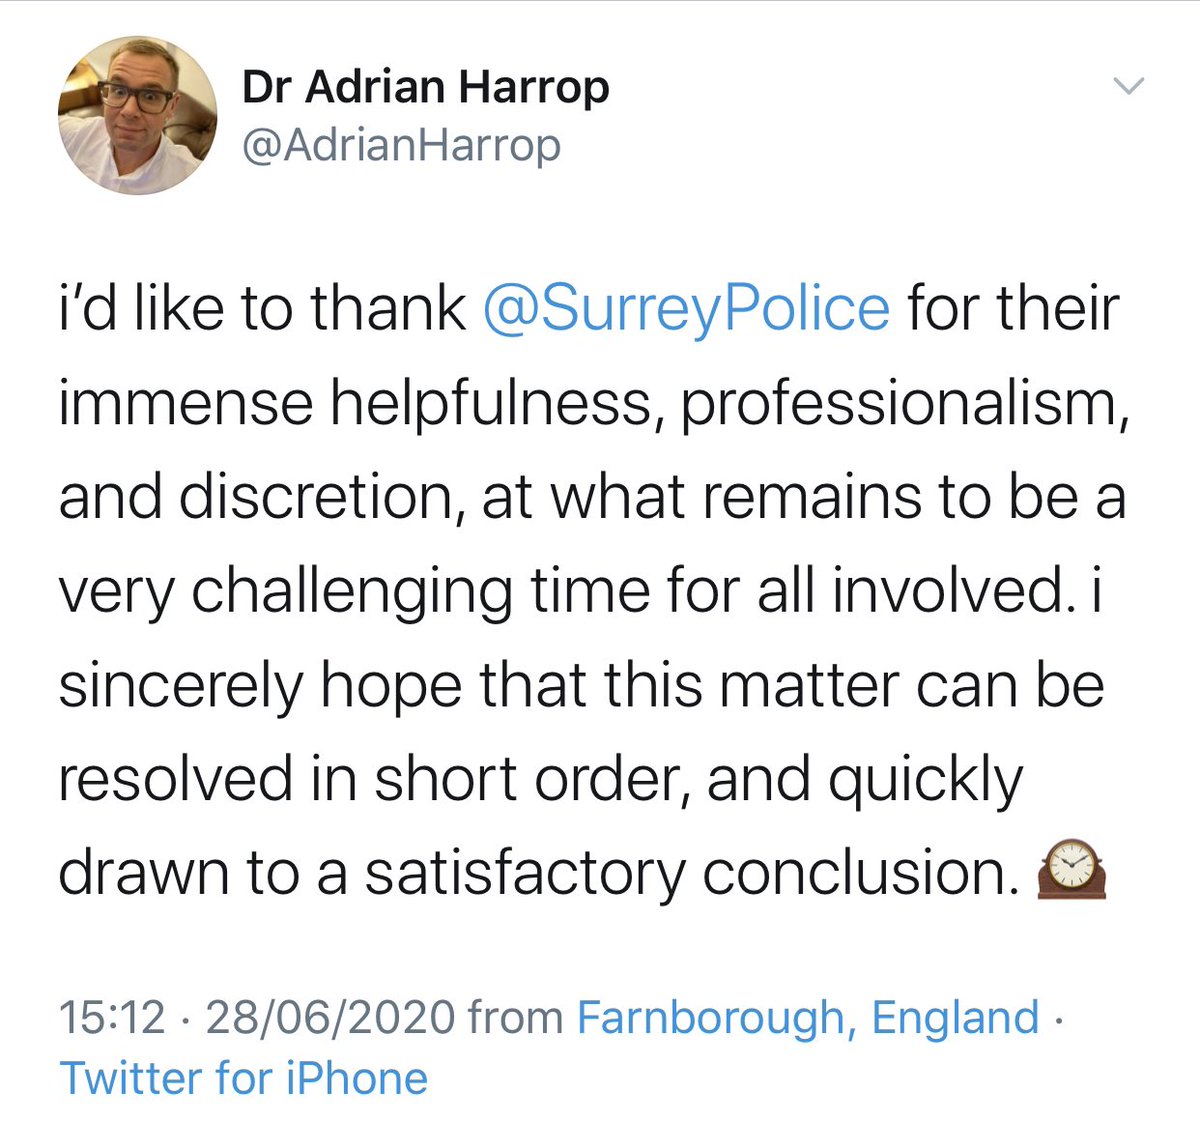 Recently Caroline has been receiving several takeaway deliveries, traced back to Farnborough, that she didn't order from someone harassing her. Harrop has now tweeted that he's been mysteriously speaking to police and put his location as 'Farnborough'. 9/10